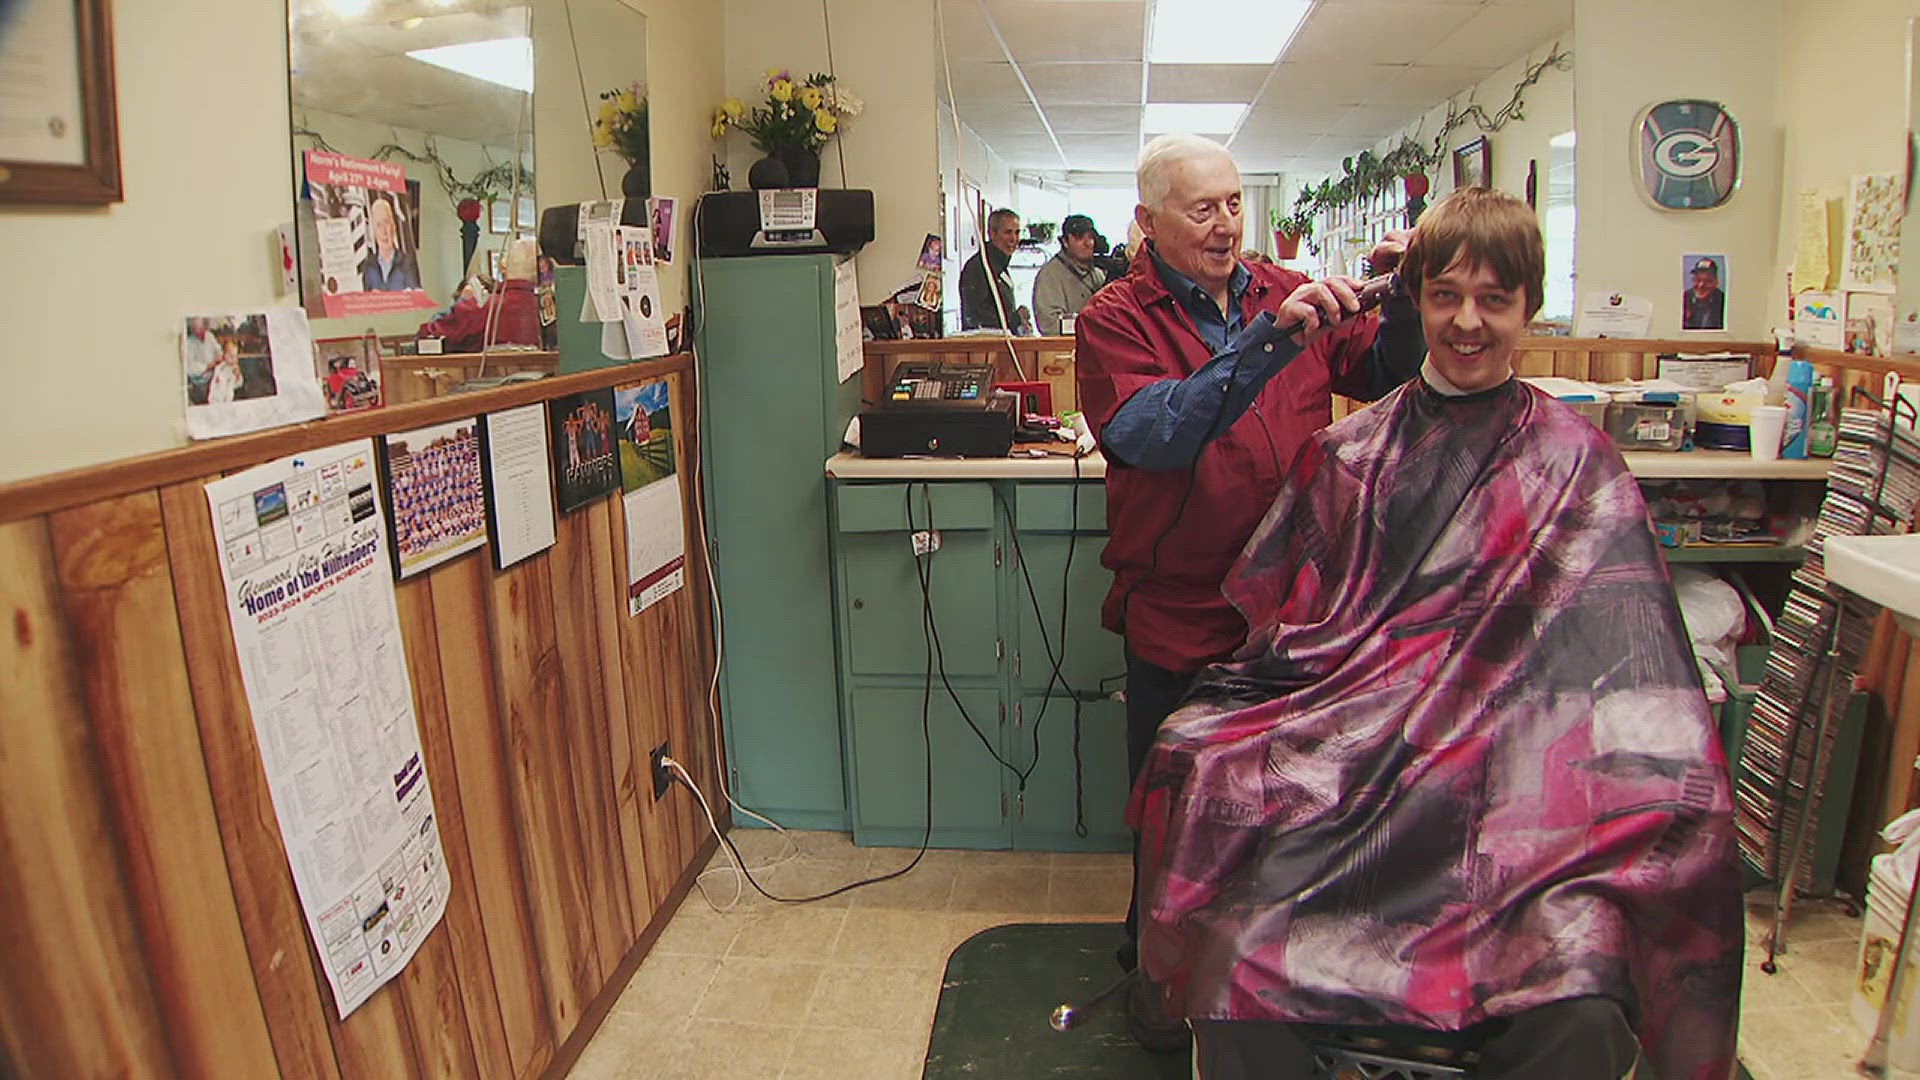 For one small town in Wisconsin, it's the end of an era as their 92-year-old barber Norm Hagen retires. Hagen said he's looking forward to trying something new.